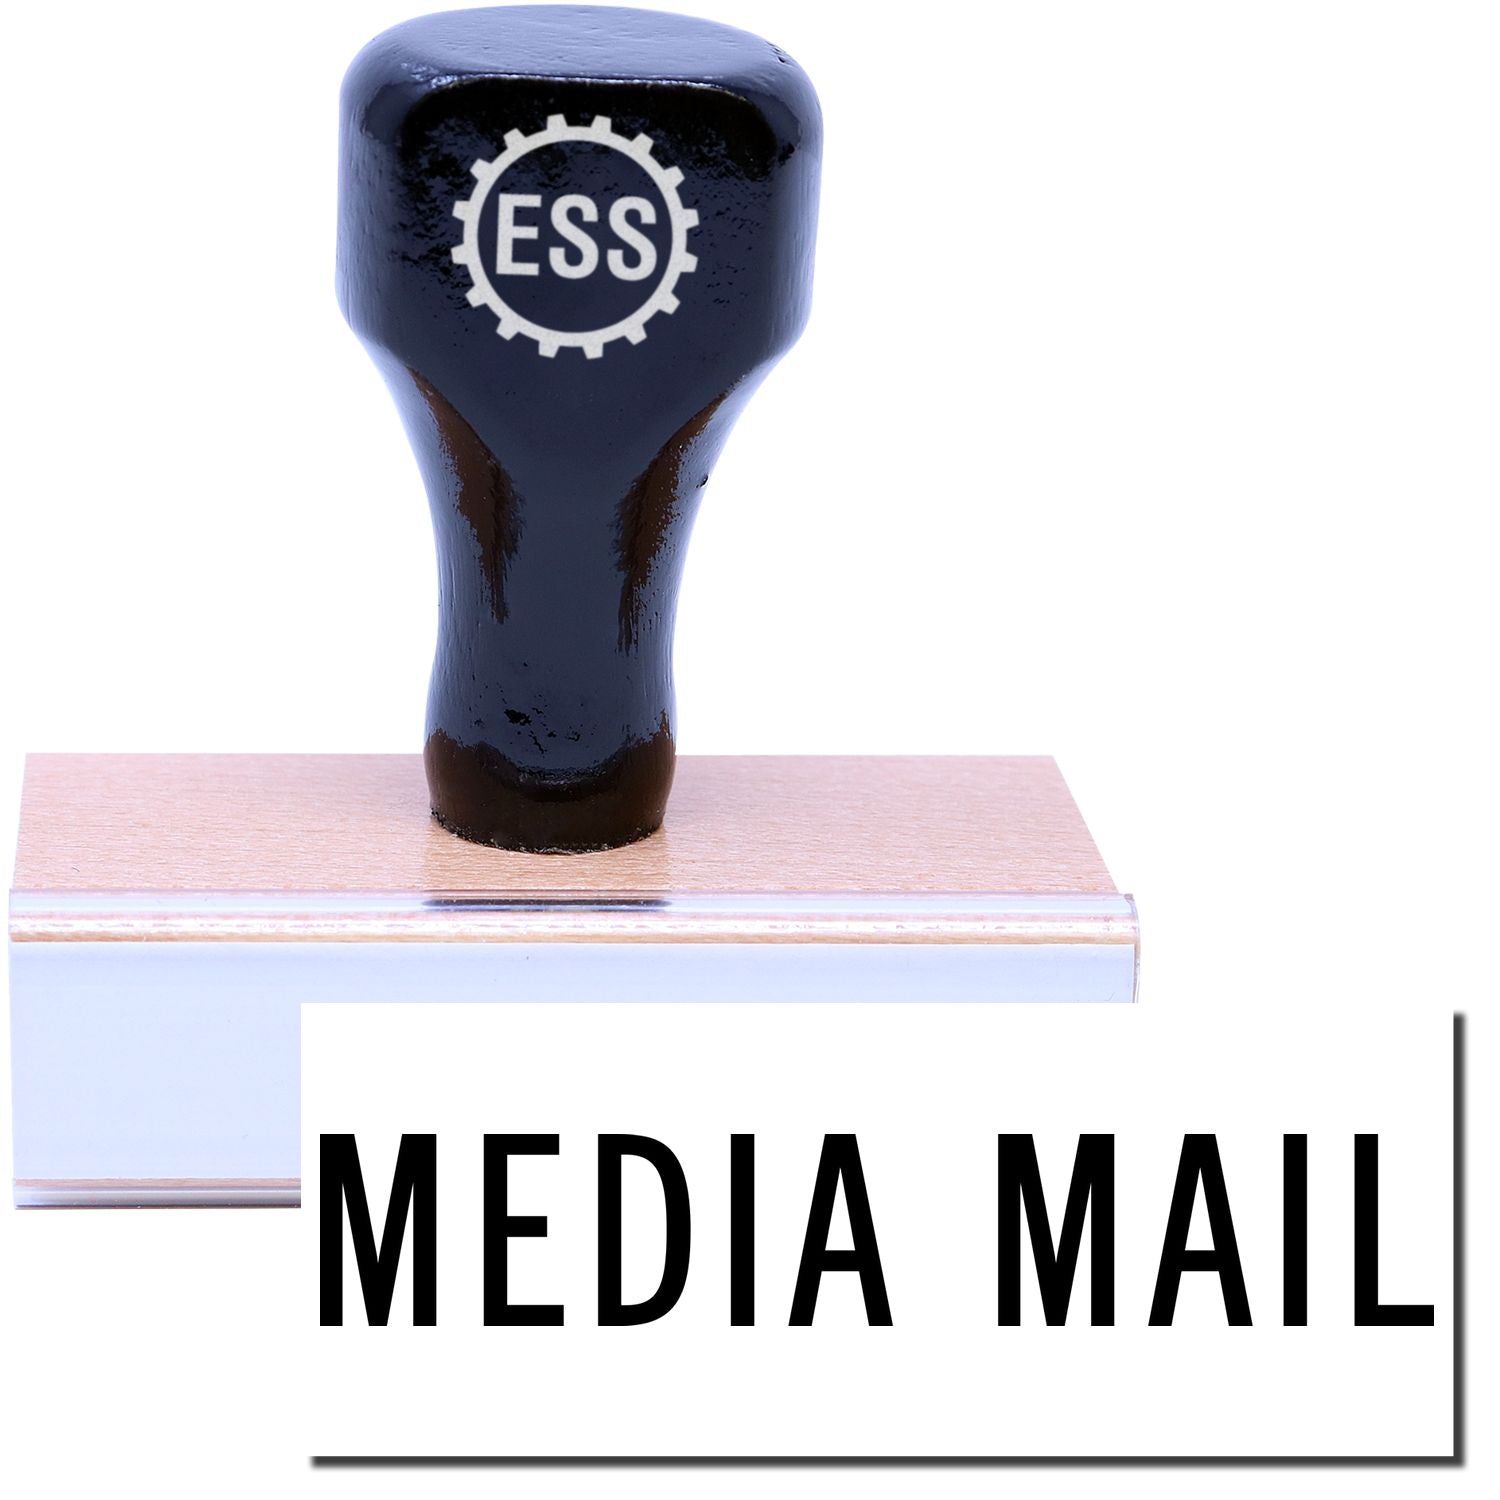 A stock office rubber stamp with a stamped image showing how the text "MEDIA MAIL" in a large font is displayed after stamping.